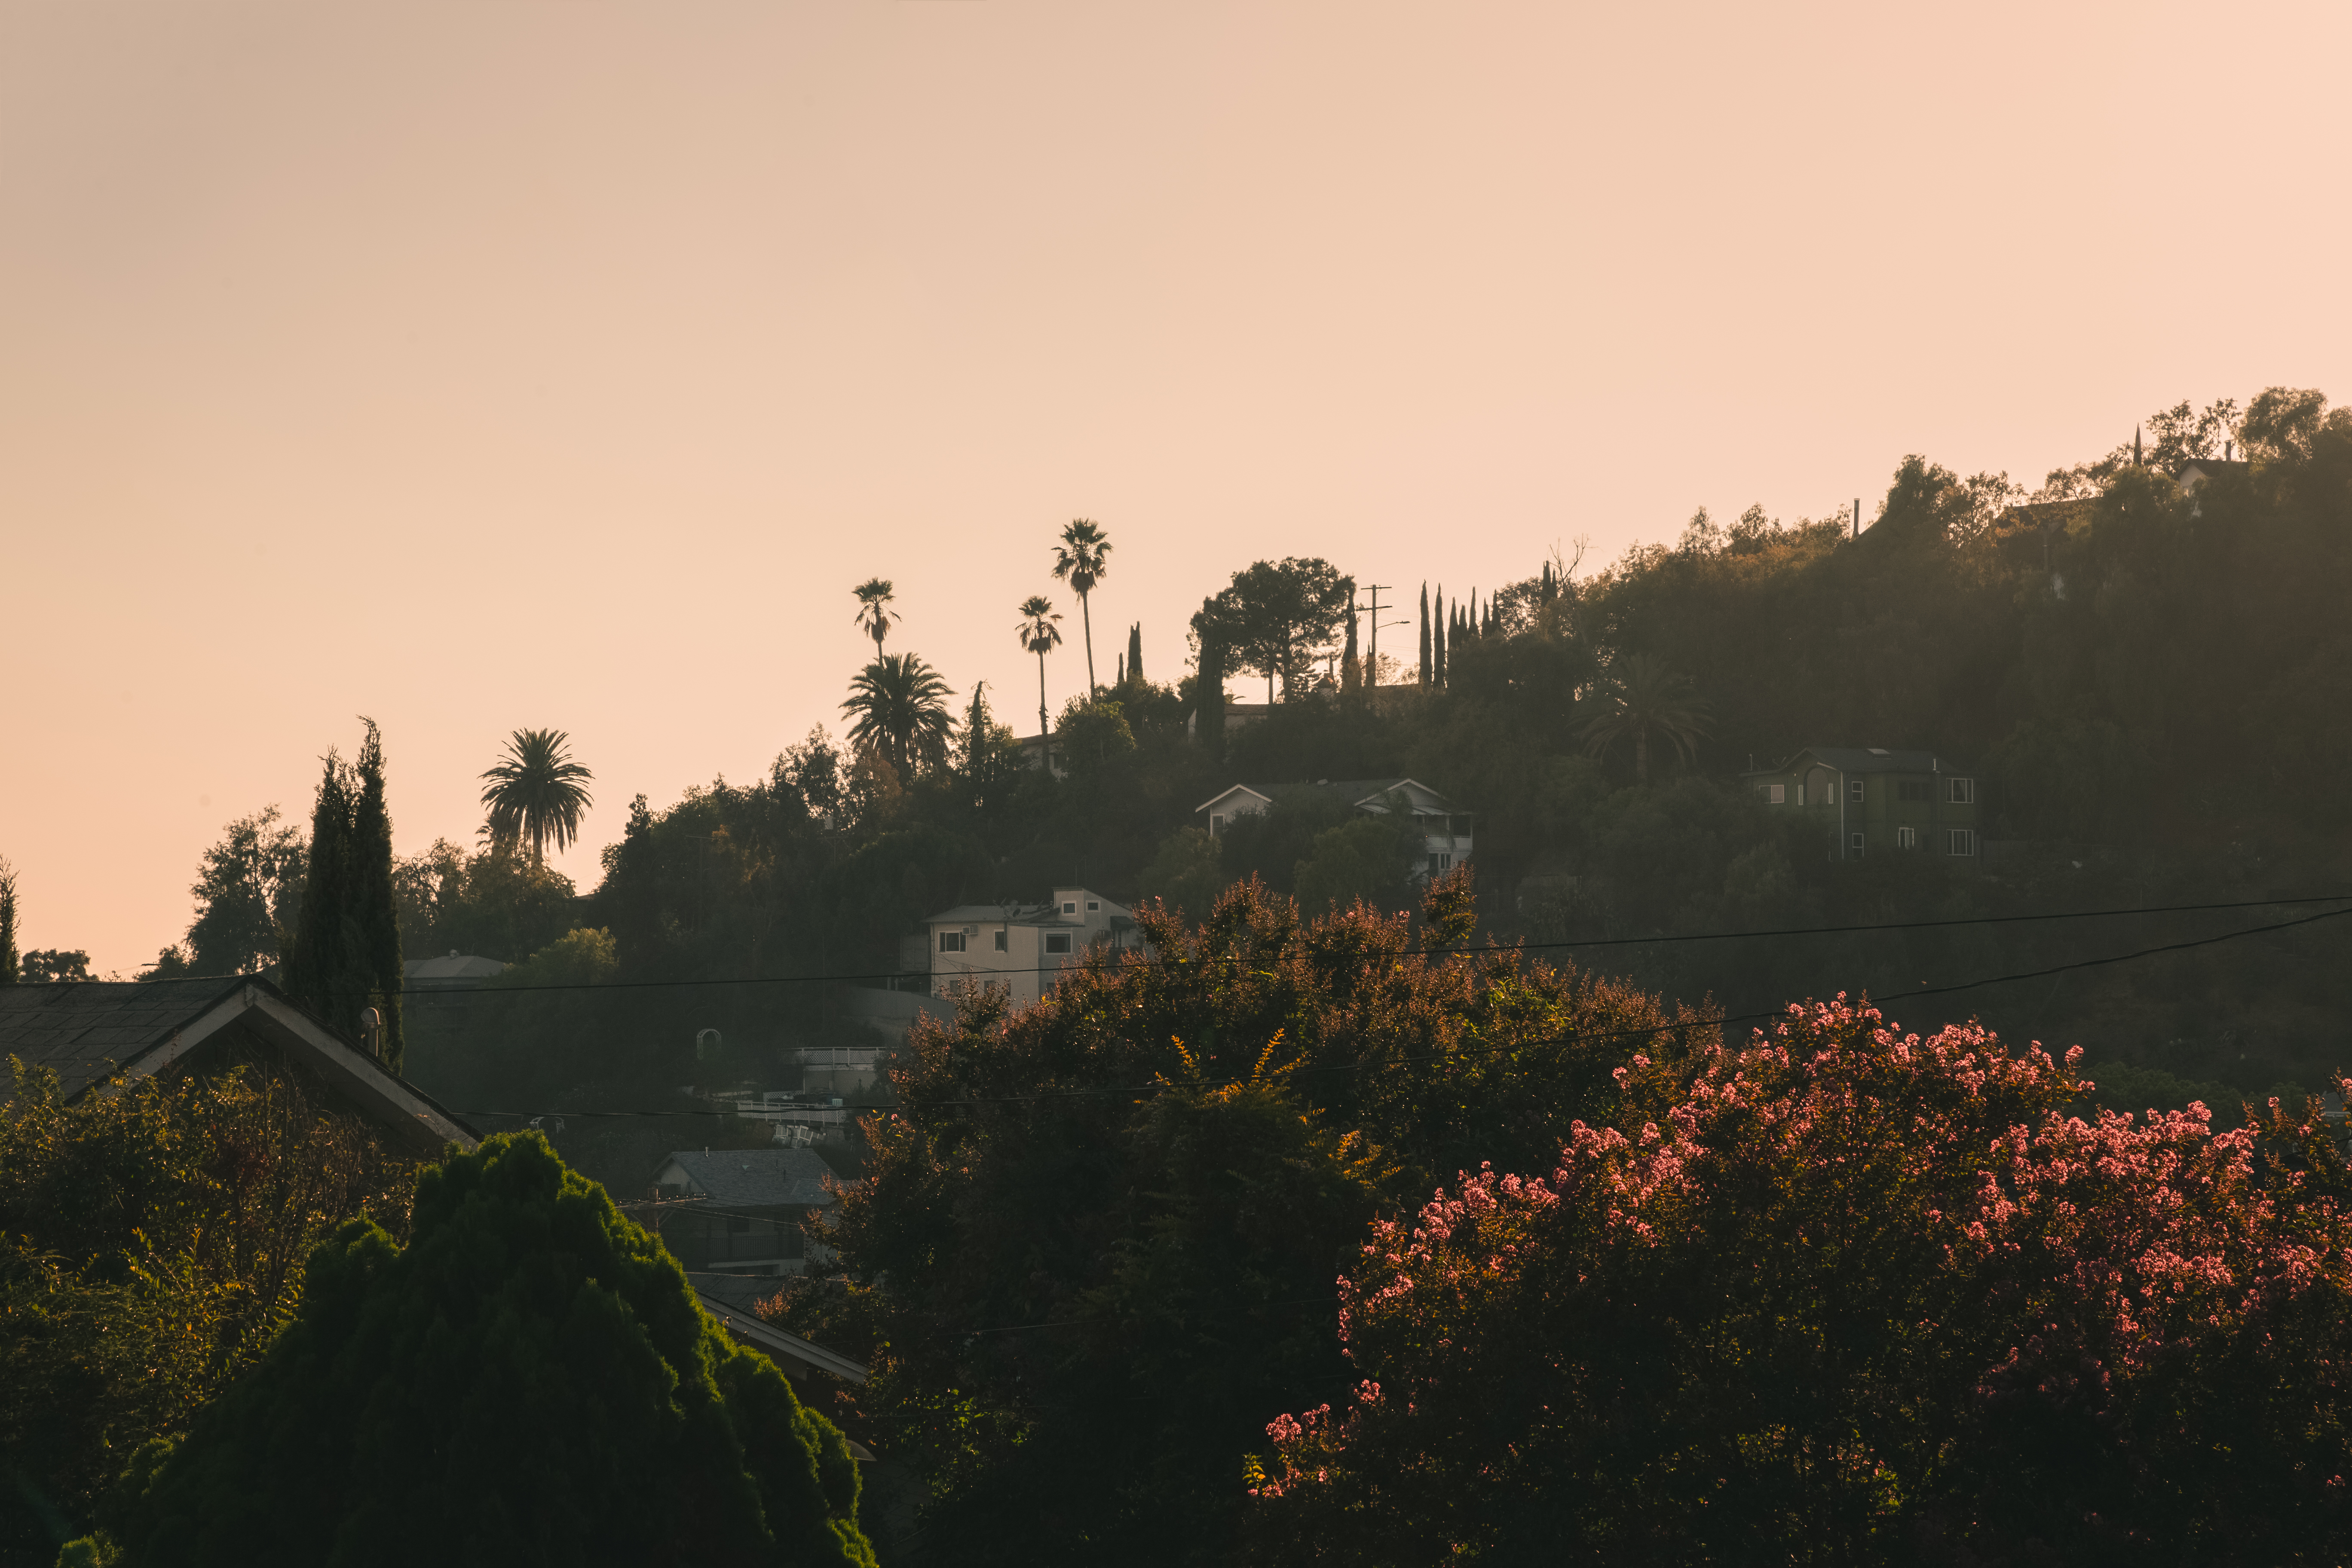 Close up of a hill side dotted with homes, palms, and trees with pink flowers at sunset.